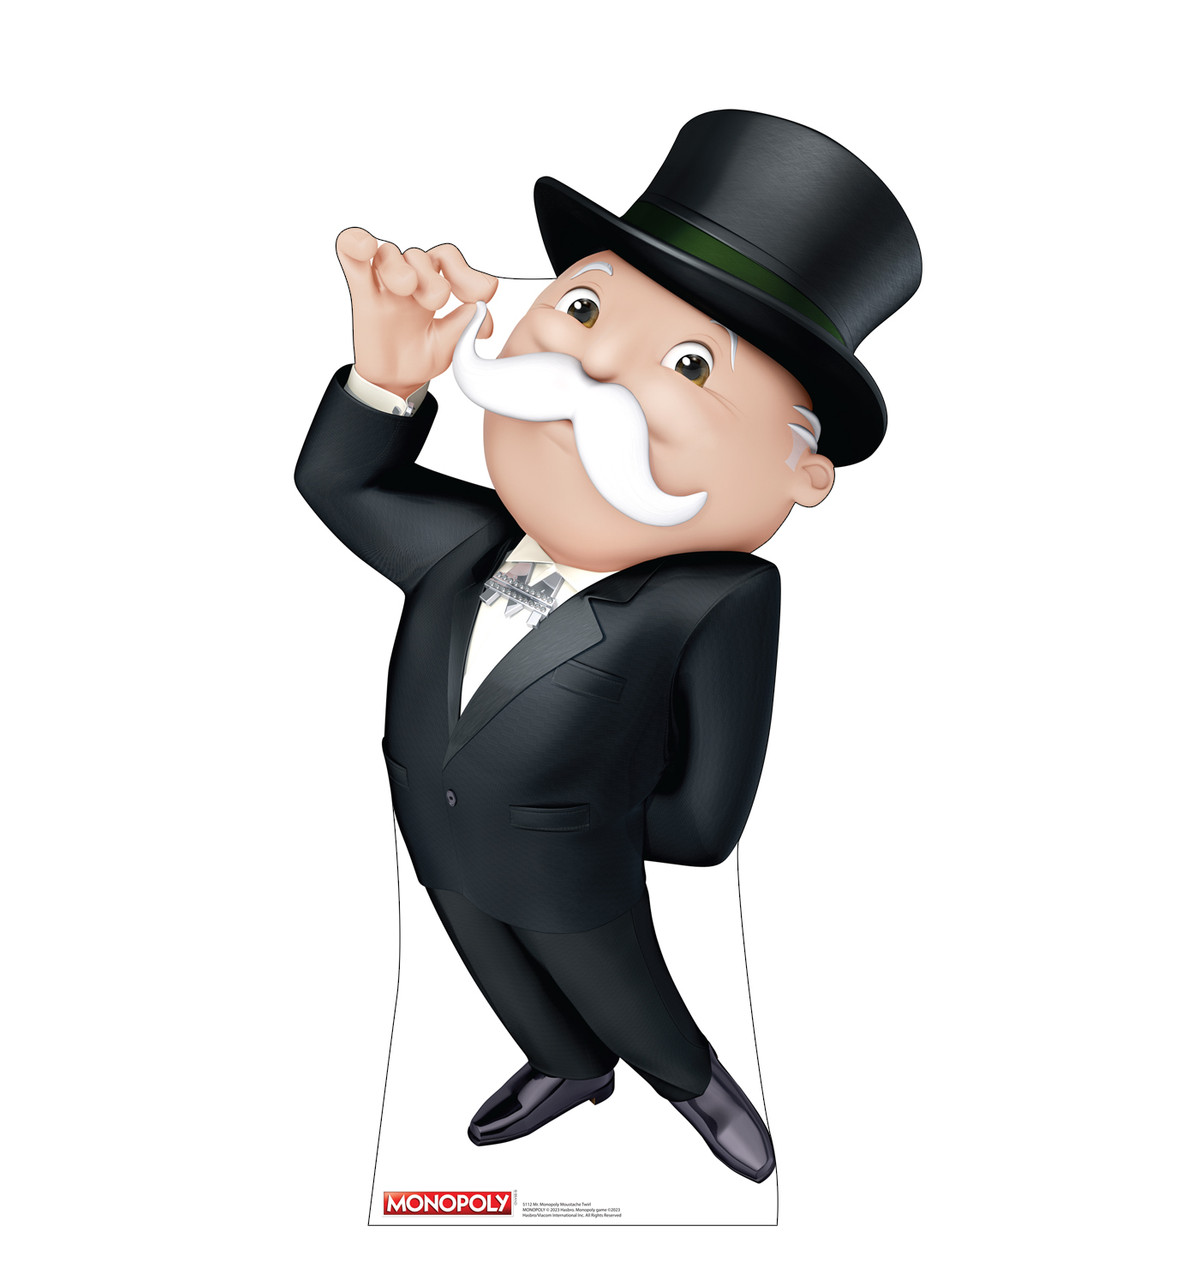 Life-size cardboard standee of Mr. Monopoly Moustache Twirl.